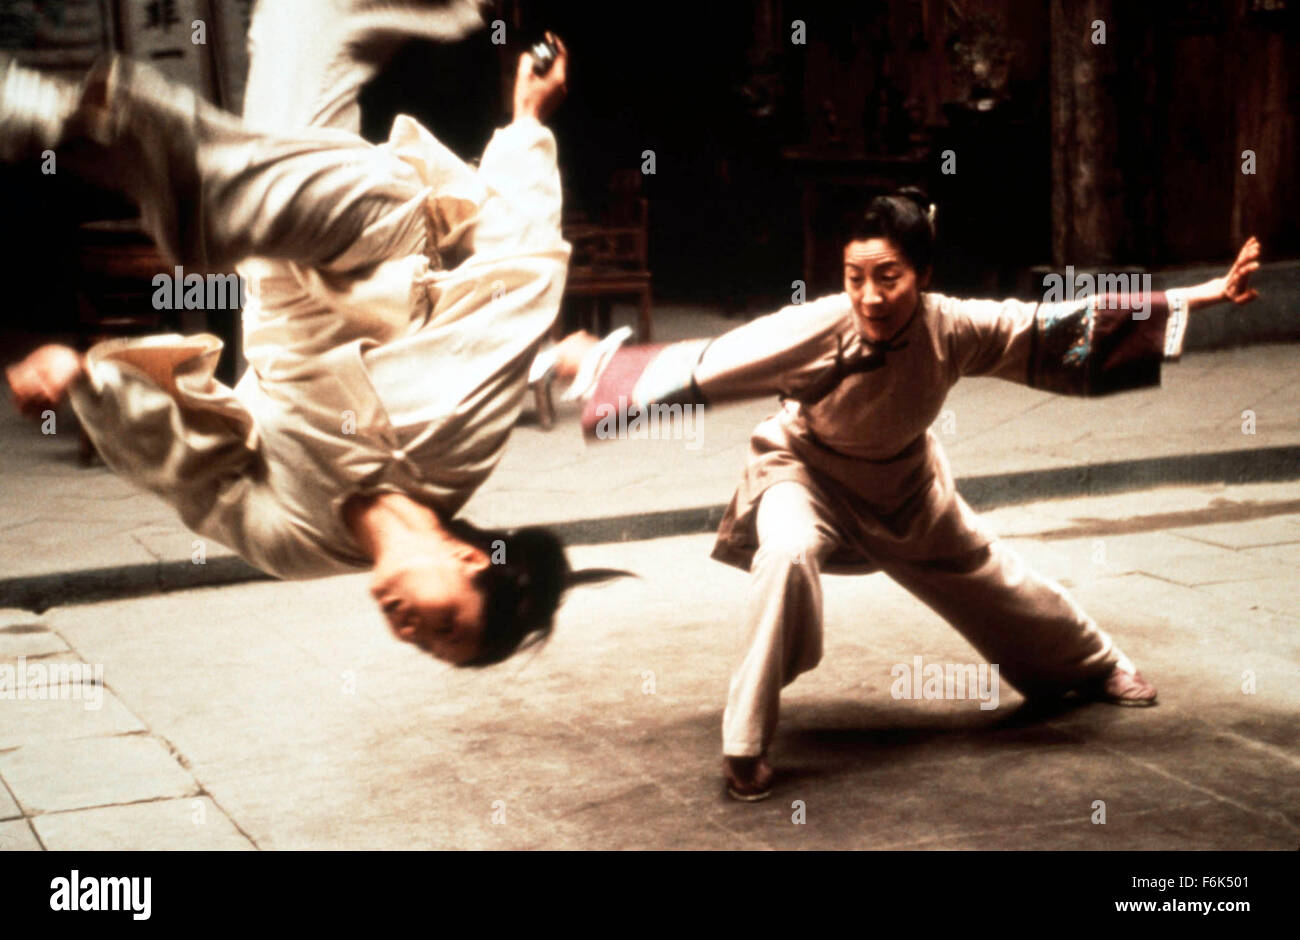 RELEASE DATE: December 22, 2000. MOVIE TITLE: Crouching Tiger, Hidden Dragon. STUDIO: Sony Pictures Classics. PLOT: Two warriors in pursuit of a stolen sword and a notorious fugitive are led to an impetuous, physically-skilled, teenage nobleman's daughter, who is at a crossroads in her life. PICTURED: . Stock Photo